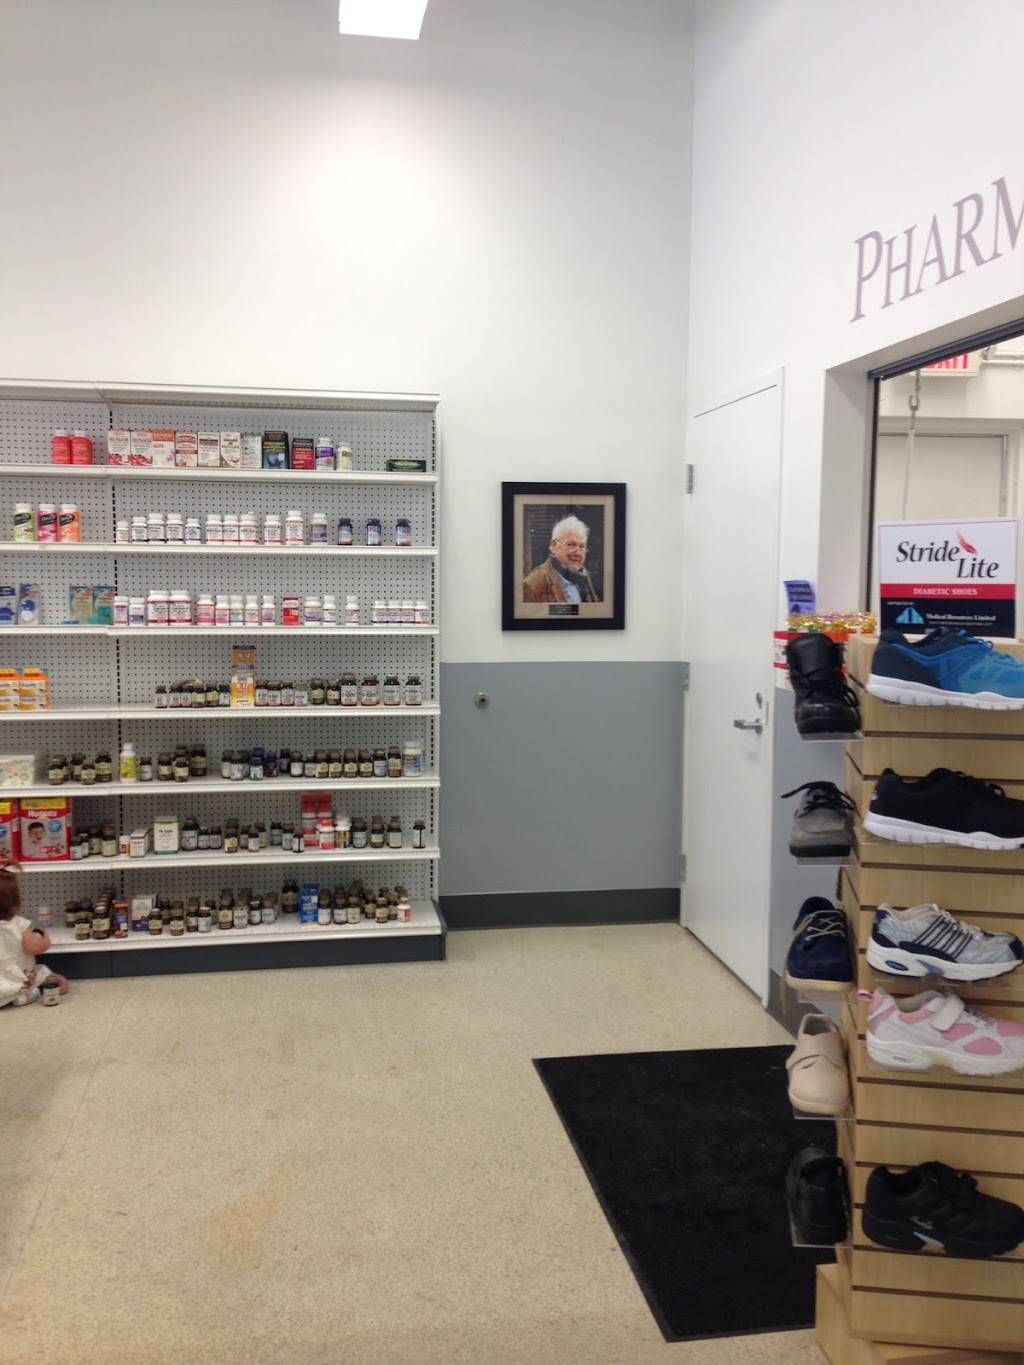 St. Clair Drug | 6718 St Clair Ave., Cleveland, OH 44103, USA | Phone: (216) 361-4212